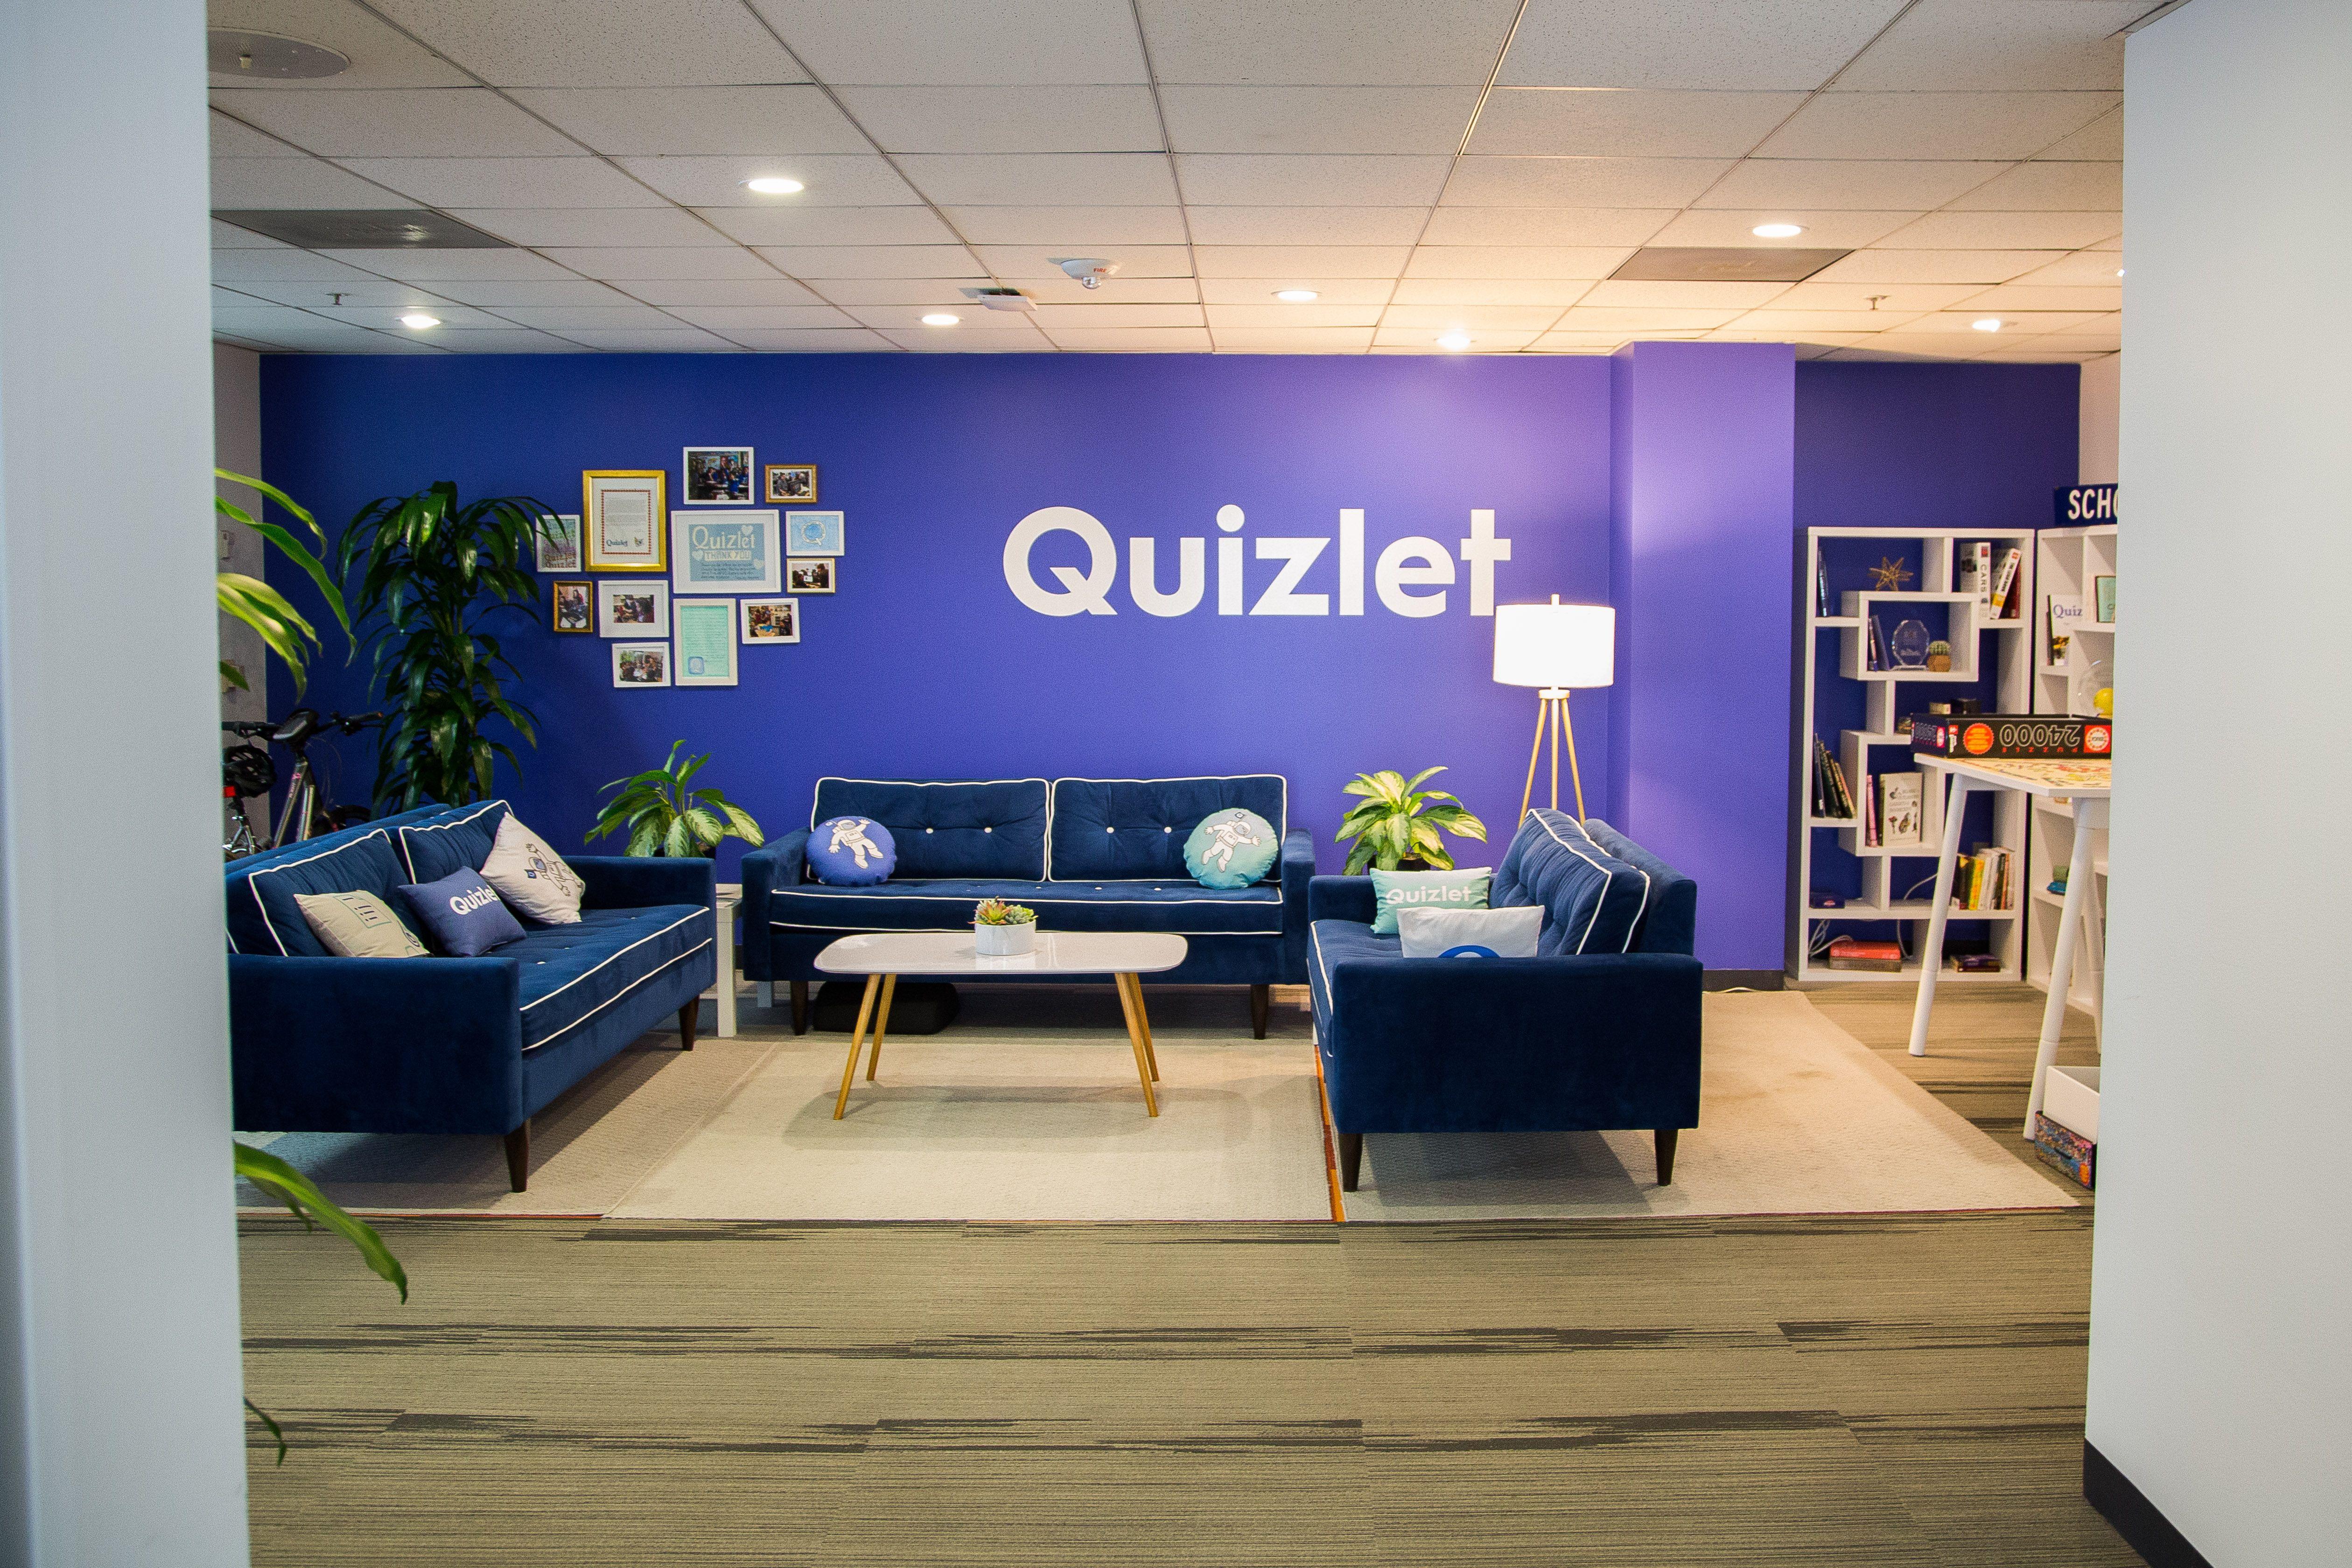 Cool Blue Quizlet Logo - Quizlet is coming to Denver